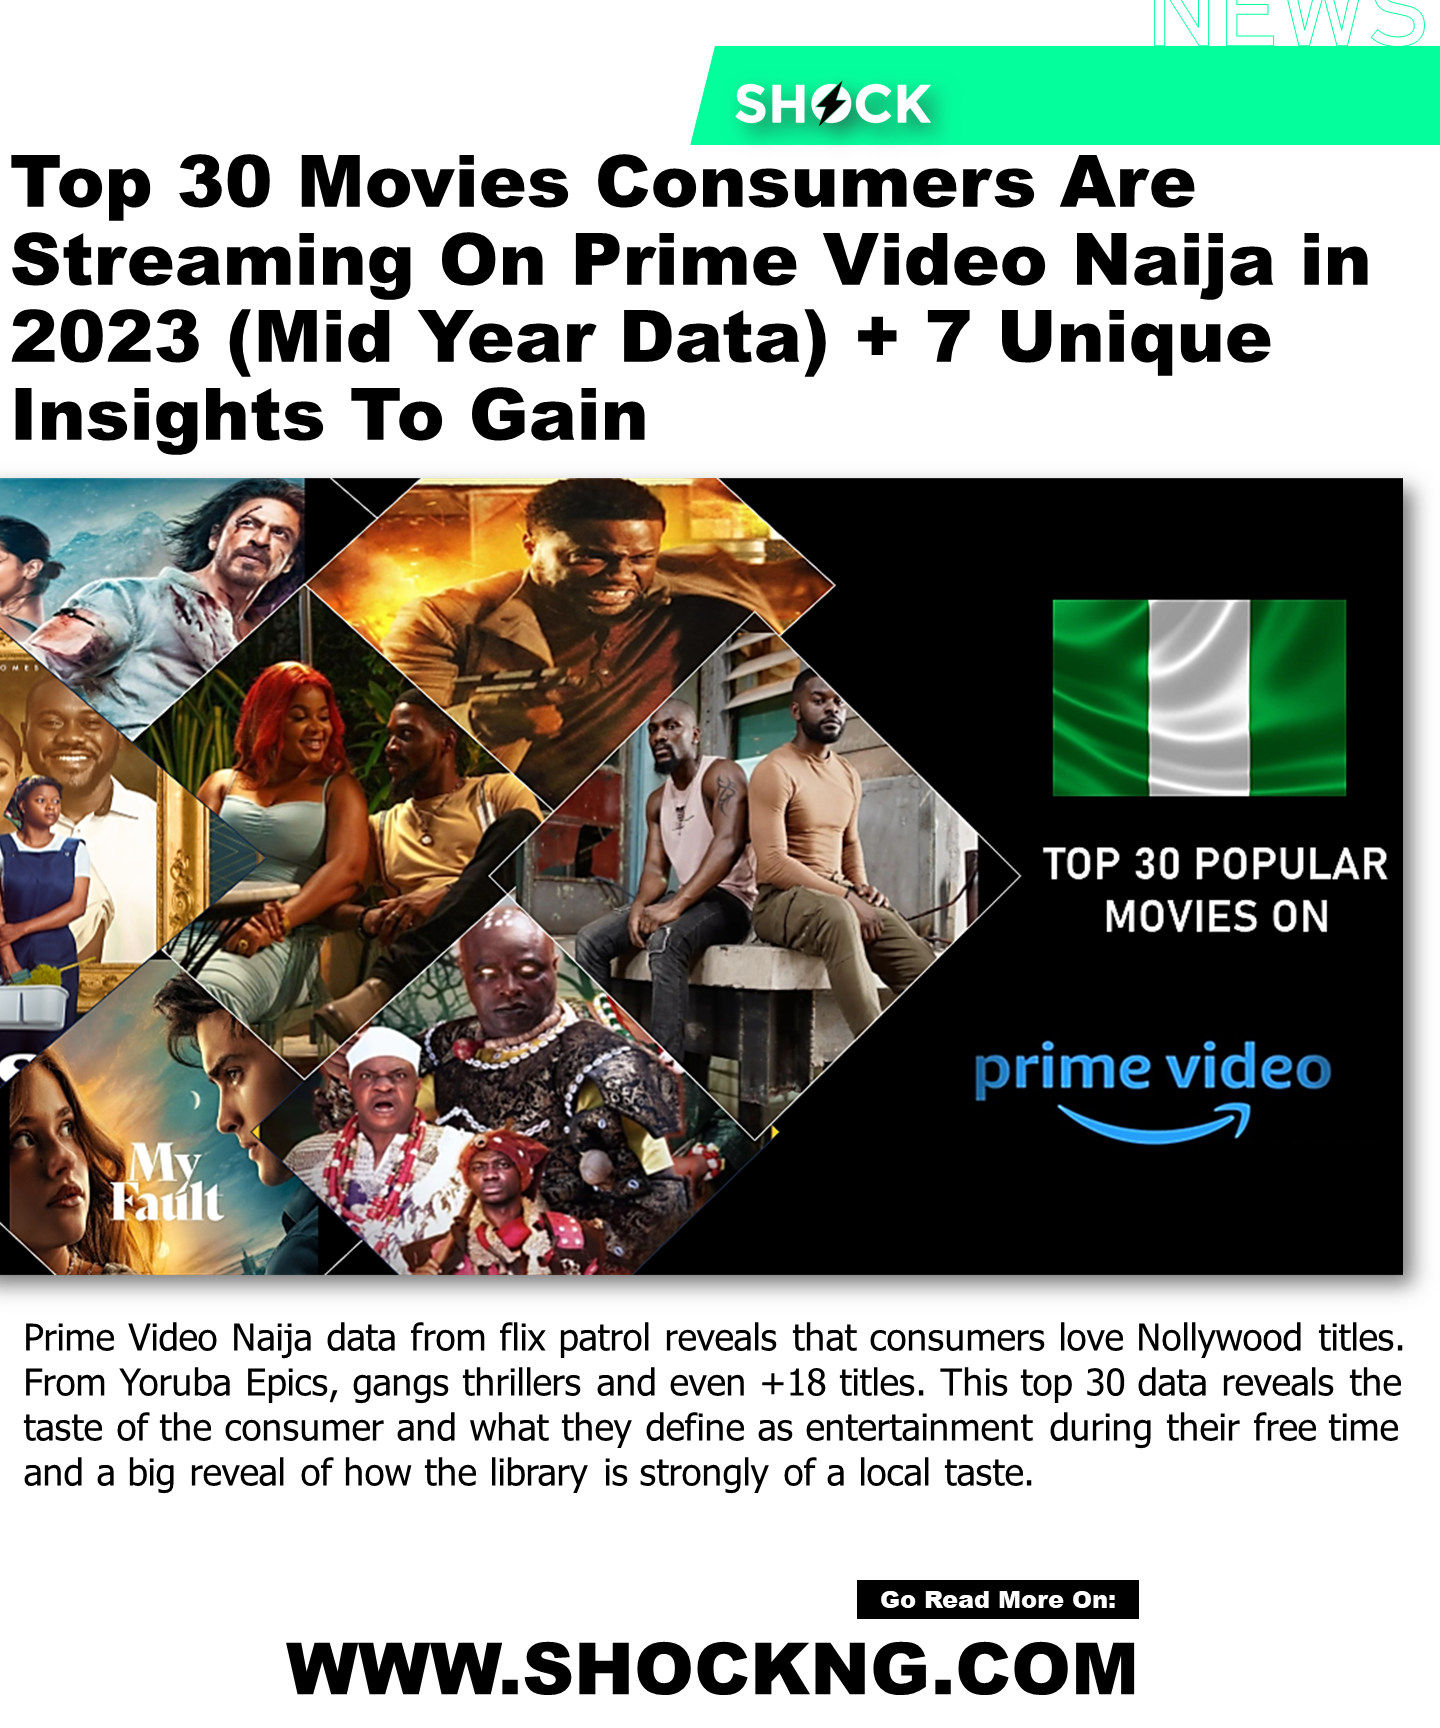 prime video naija movies to watch - Top 30 Movies Consumers Are Streaming On Prime Video Naija in 2023 (Mid Year Data)